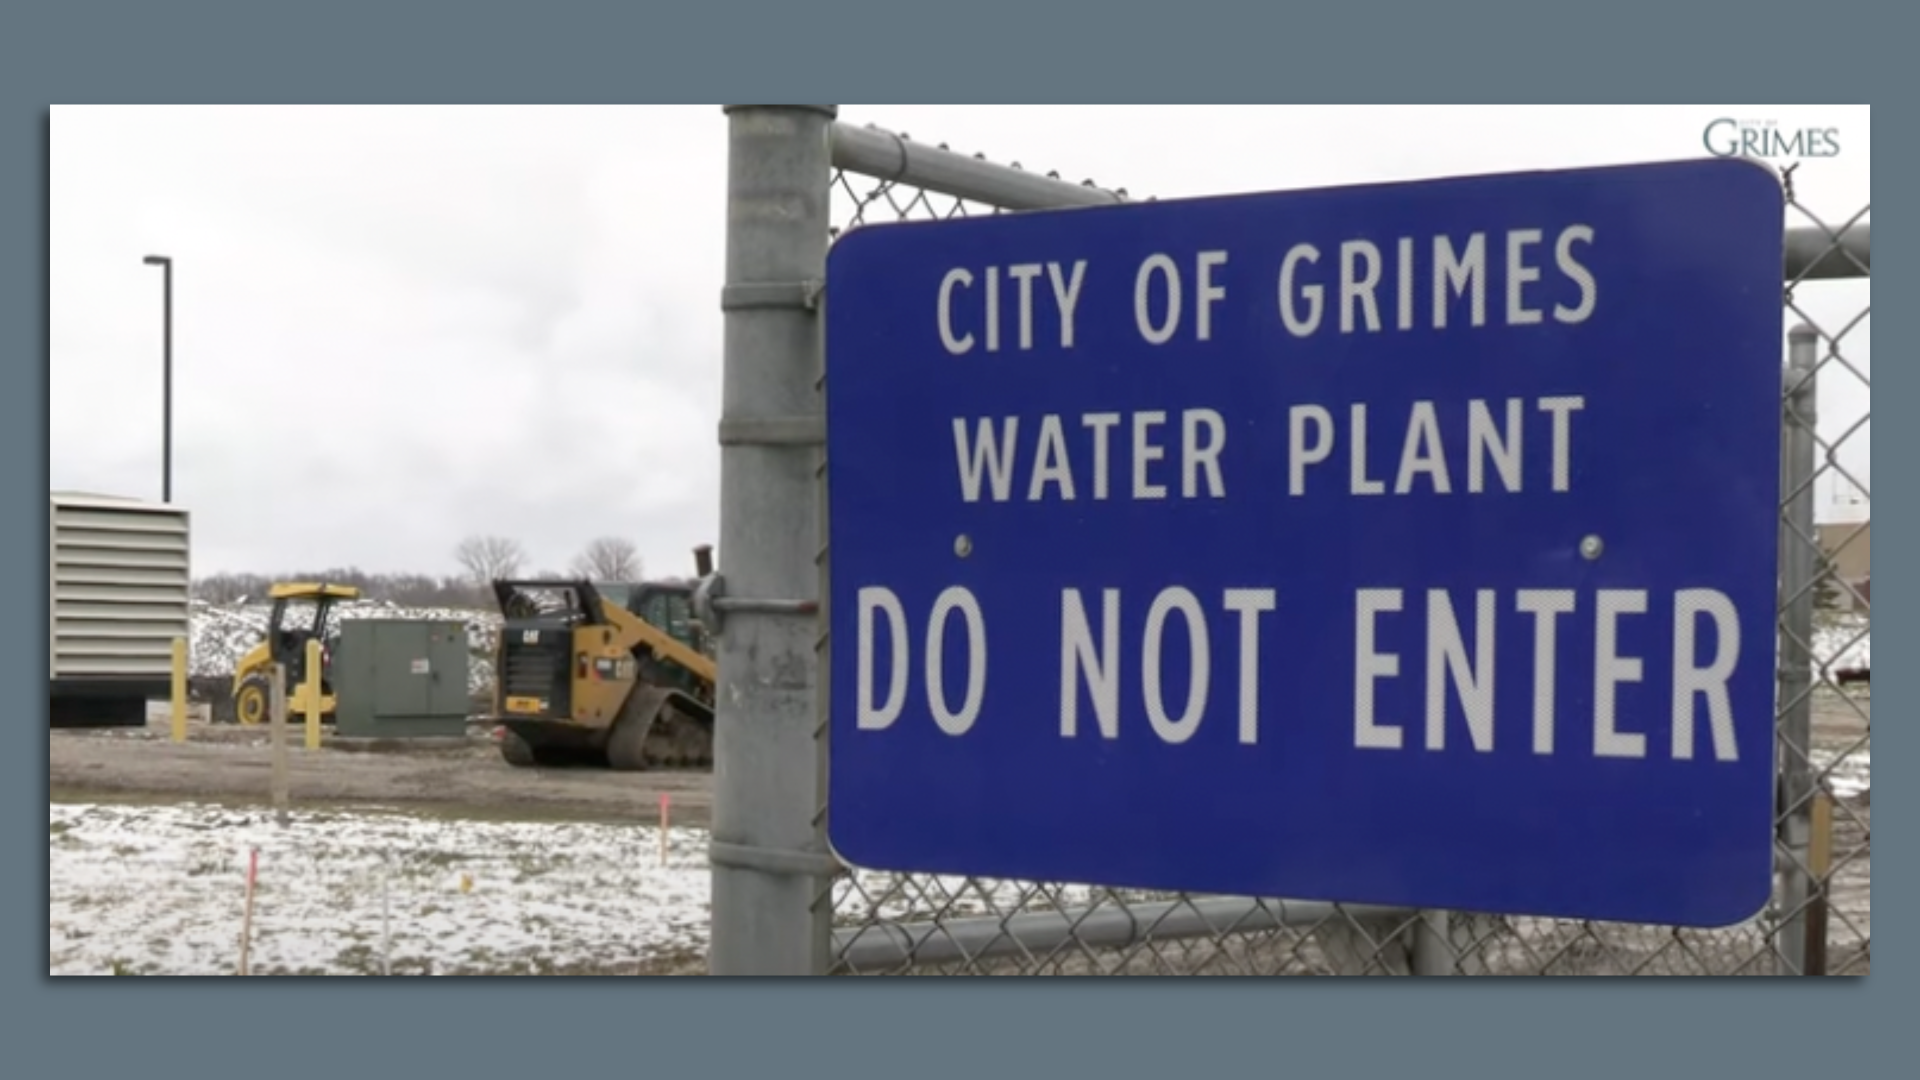 A photo of the city of Grimes water plant.